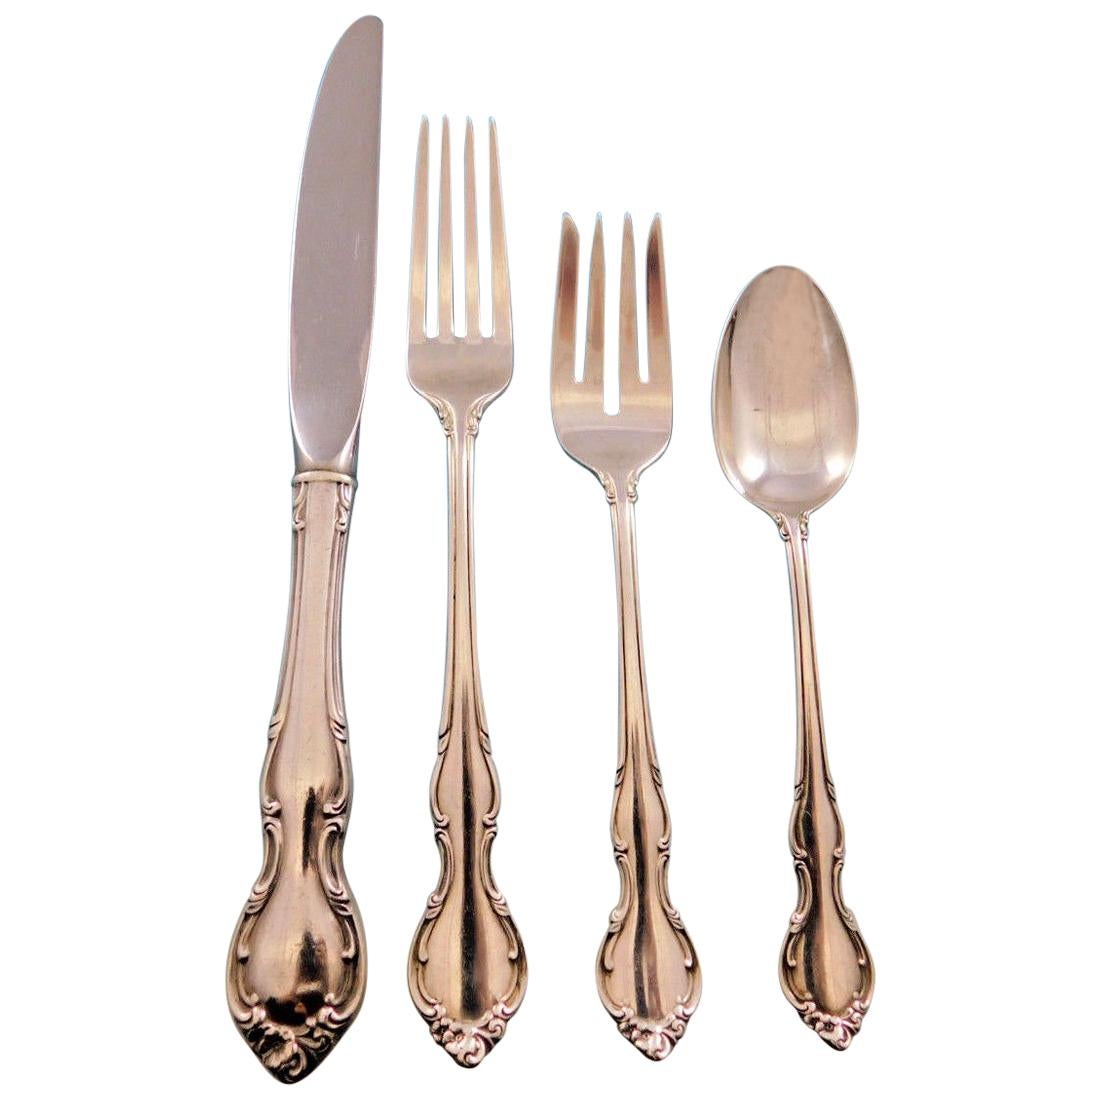 Pirouette by Alvin Sterling Silver Flatware Set for 6 Service 30 pieces For Sale